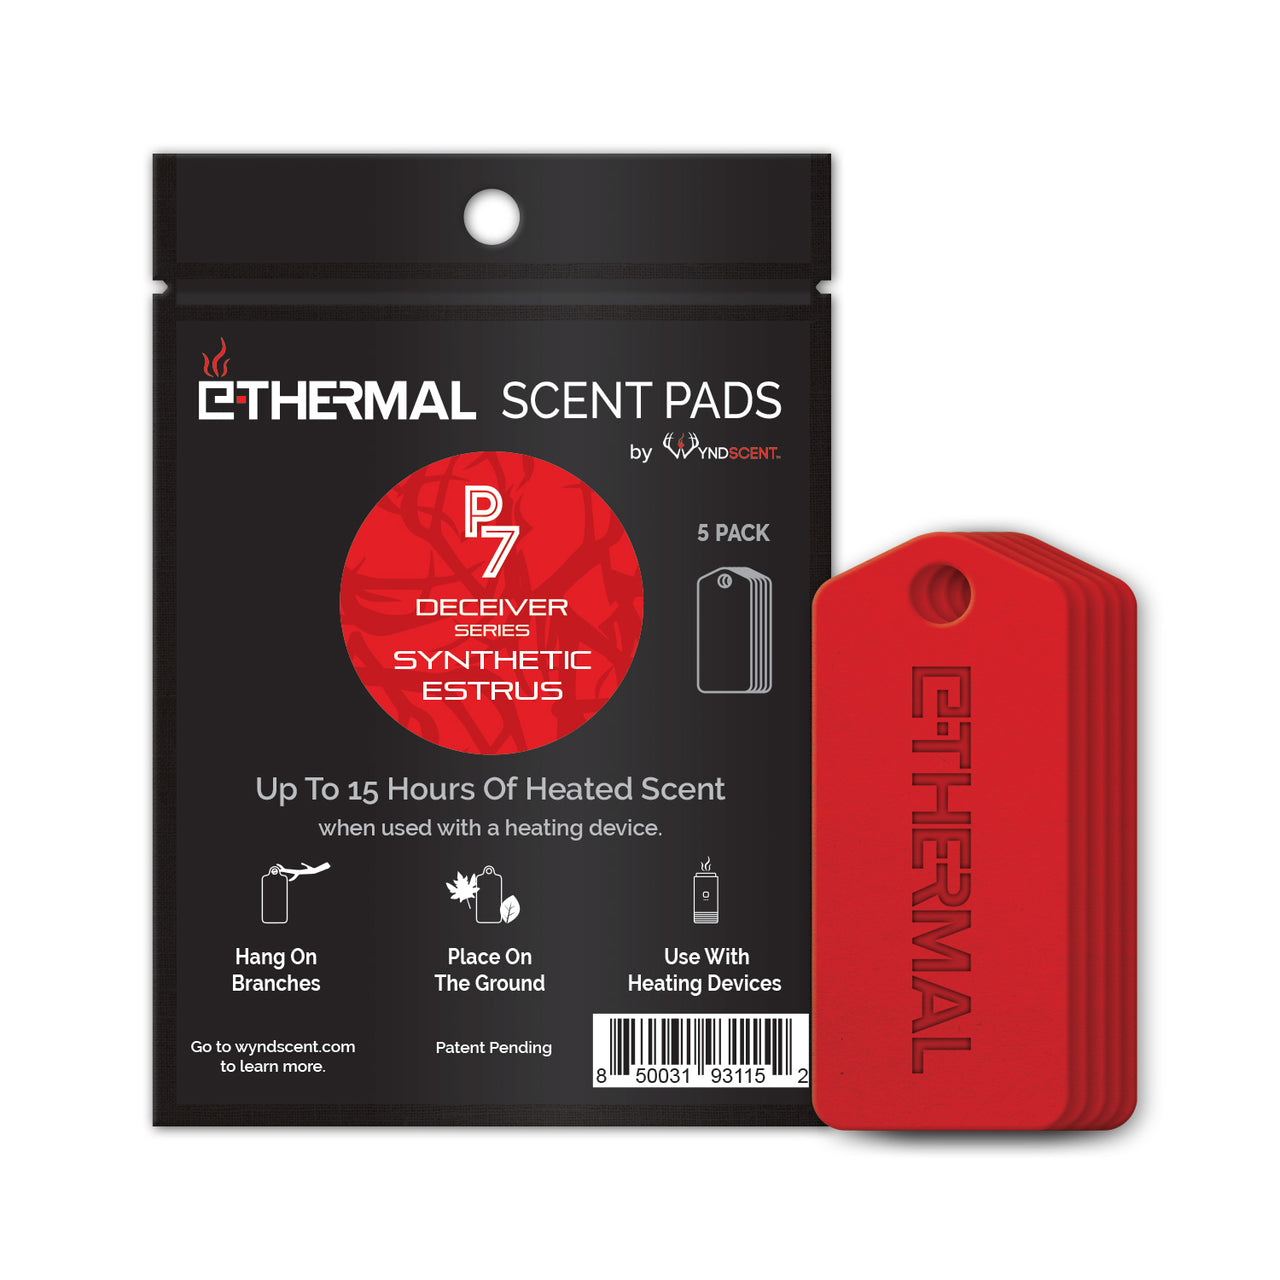 E-Thermal Scent Pad P7 Synthetic Estrus - 5 Pack